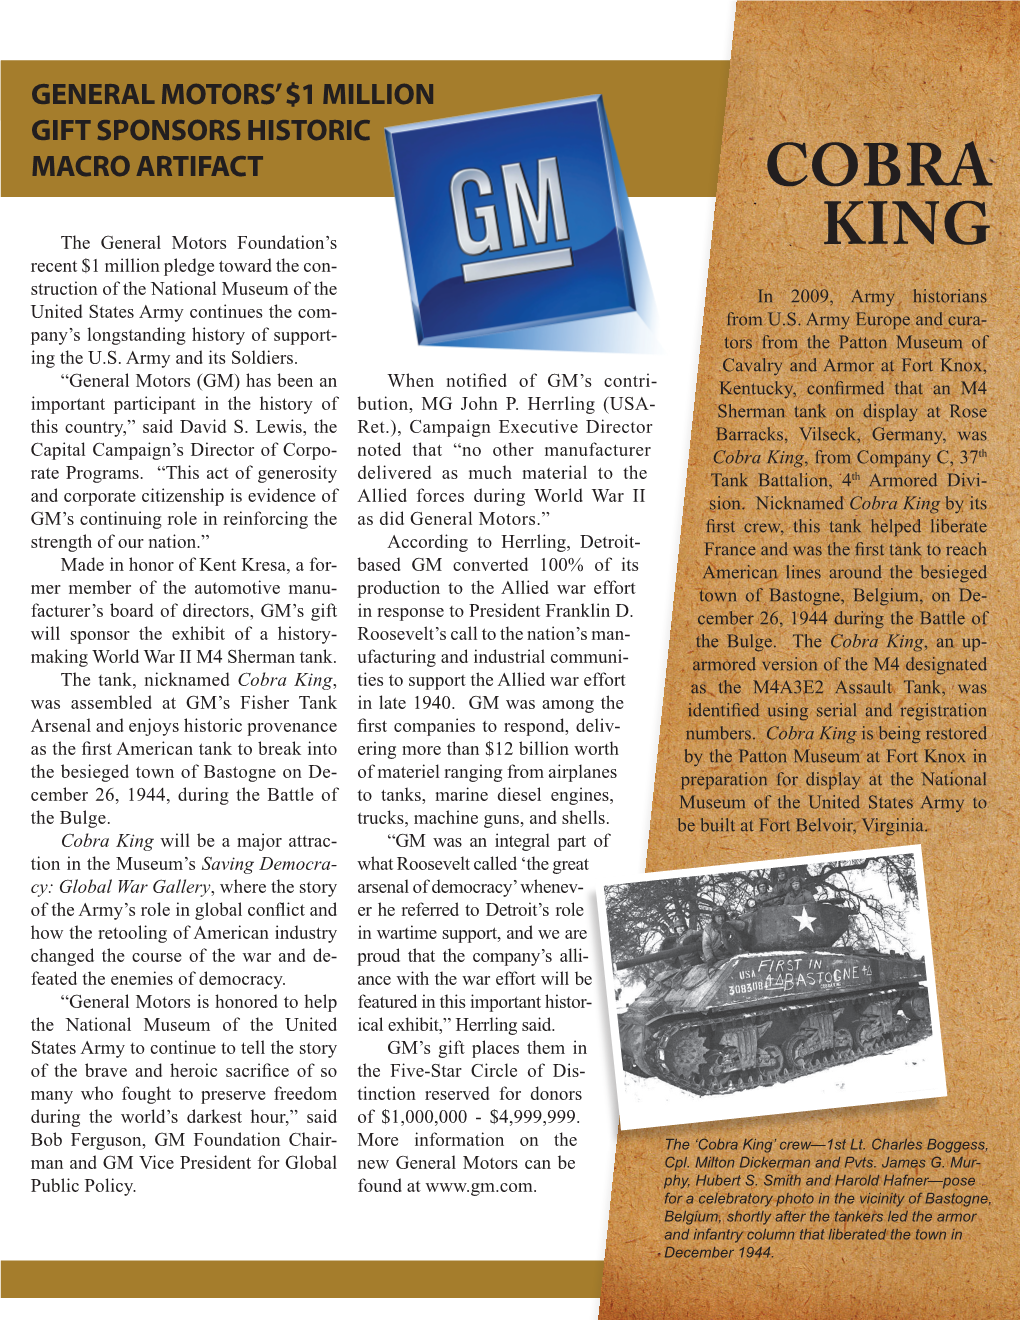 To Read About the Sherman Tank, the Cobra King, Sponsored by The